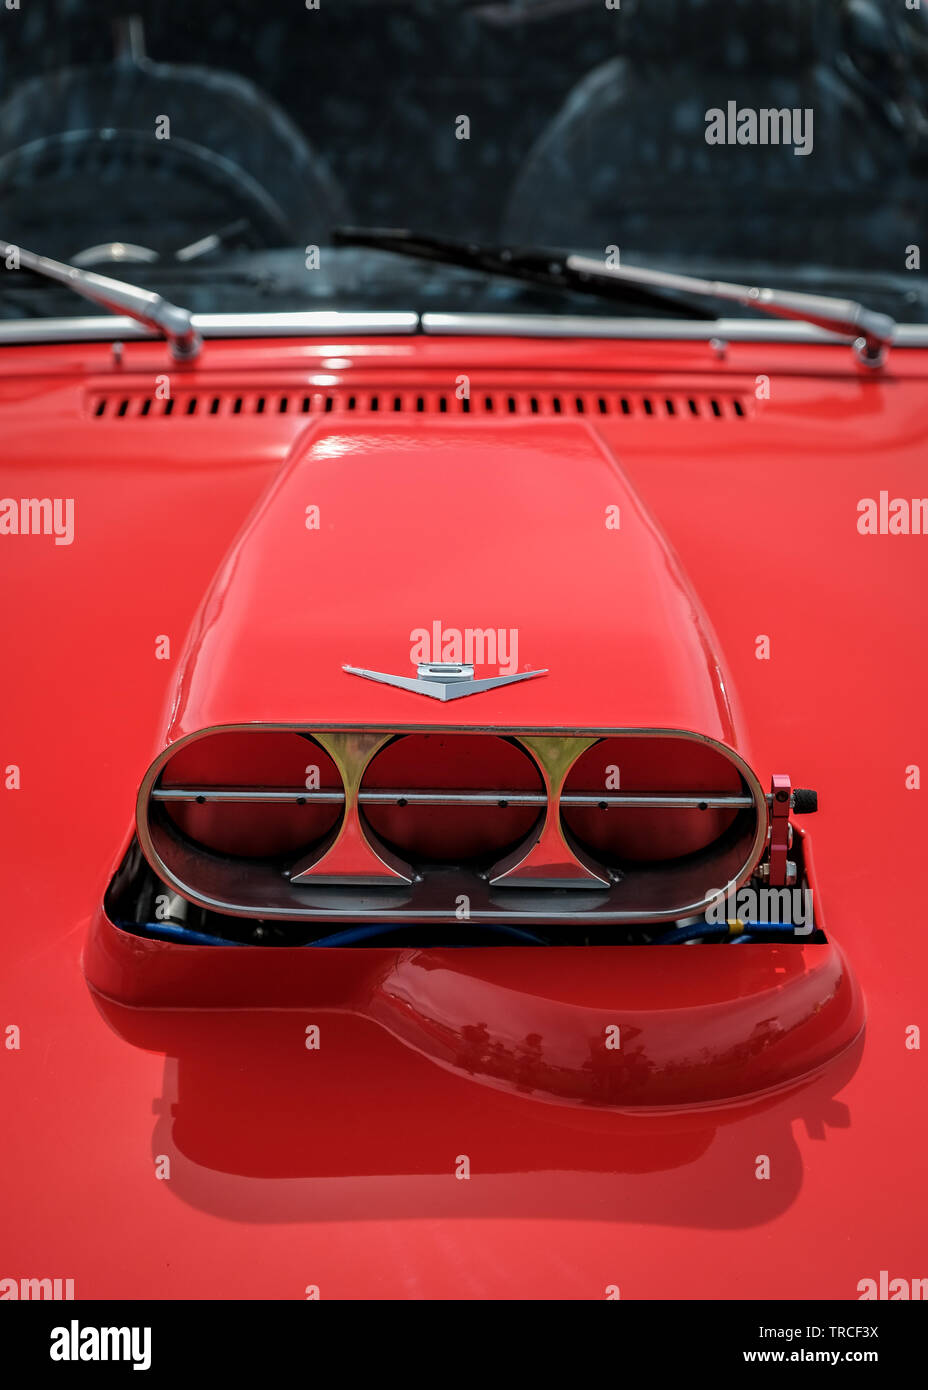 A supercharger intake on the bonnet of a vintage red Triumph Spitfire sports car Stock Photo